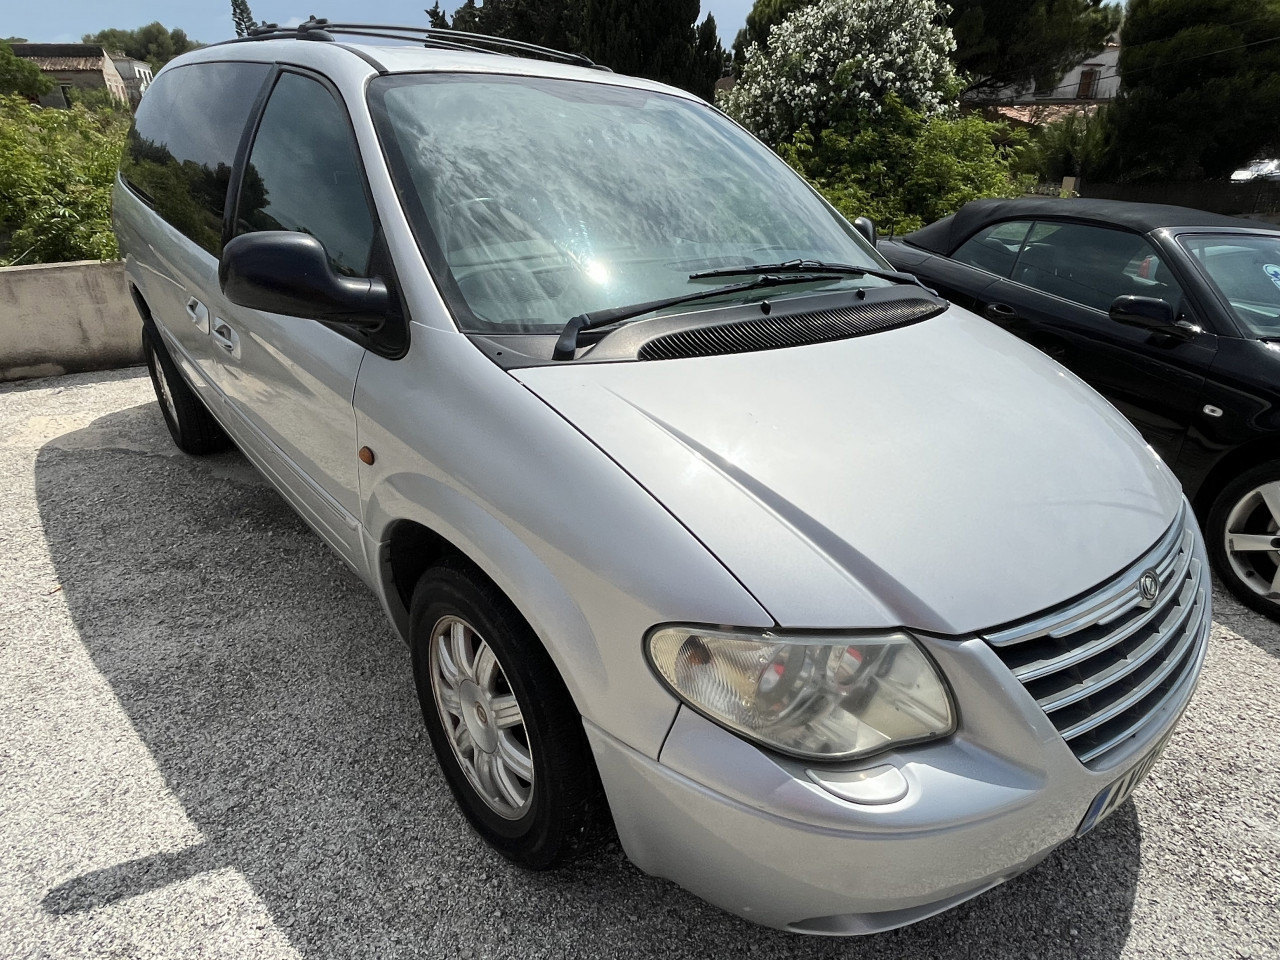 Chrysler Grand Voyager 2.8 Crdi Limited Xsa Automático People carrier Foto